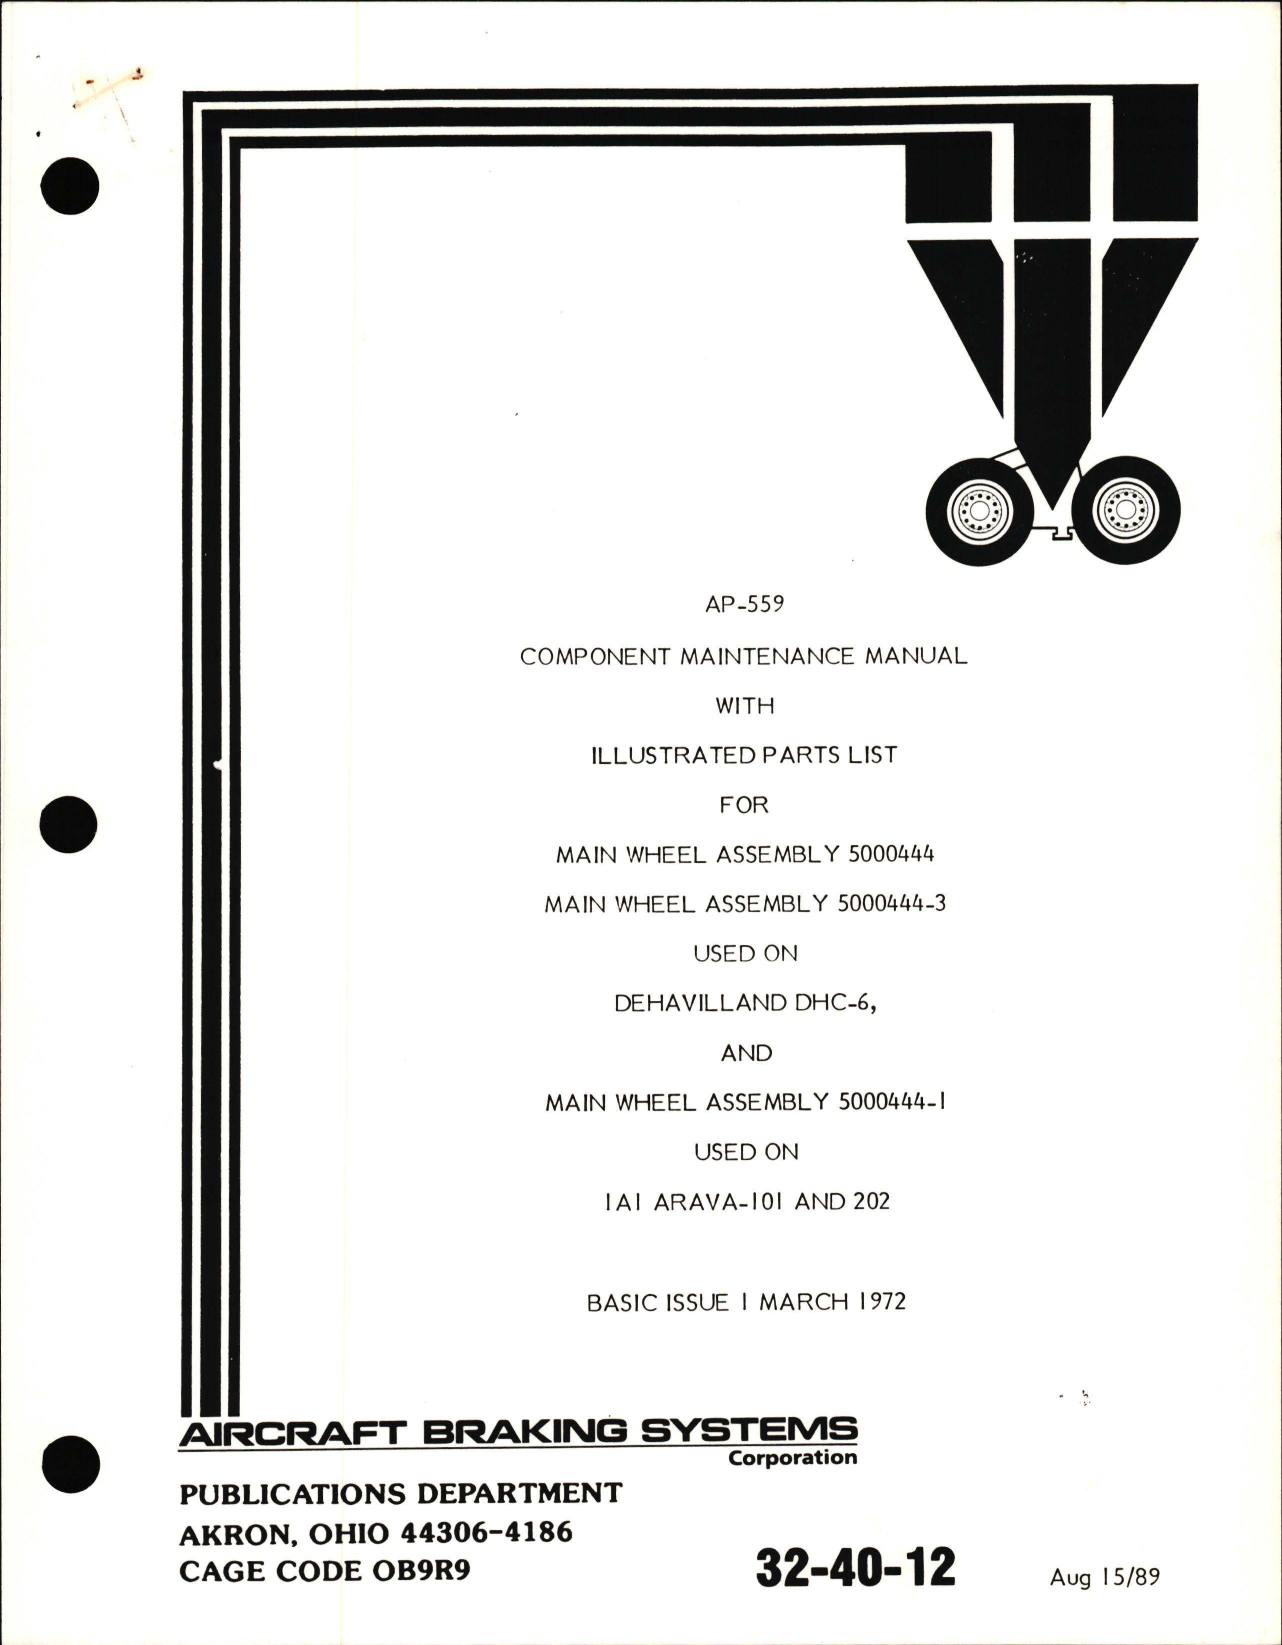 Sample page 1 from AirCorps Library document: Component Maintenance Manual AP-559 with Illustrated Parts List for Main Wheel Assembly 5000444, 5000444-3, and 5000444-1